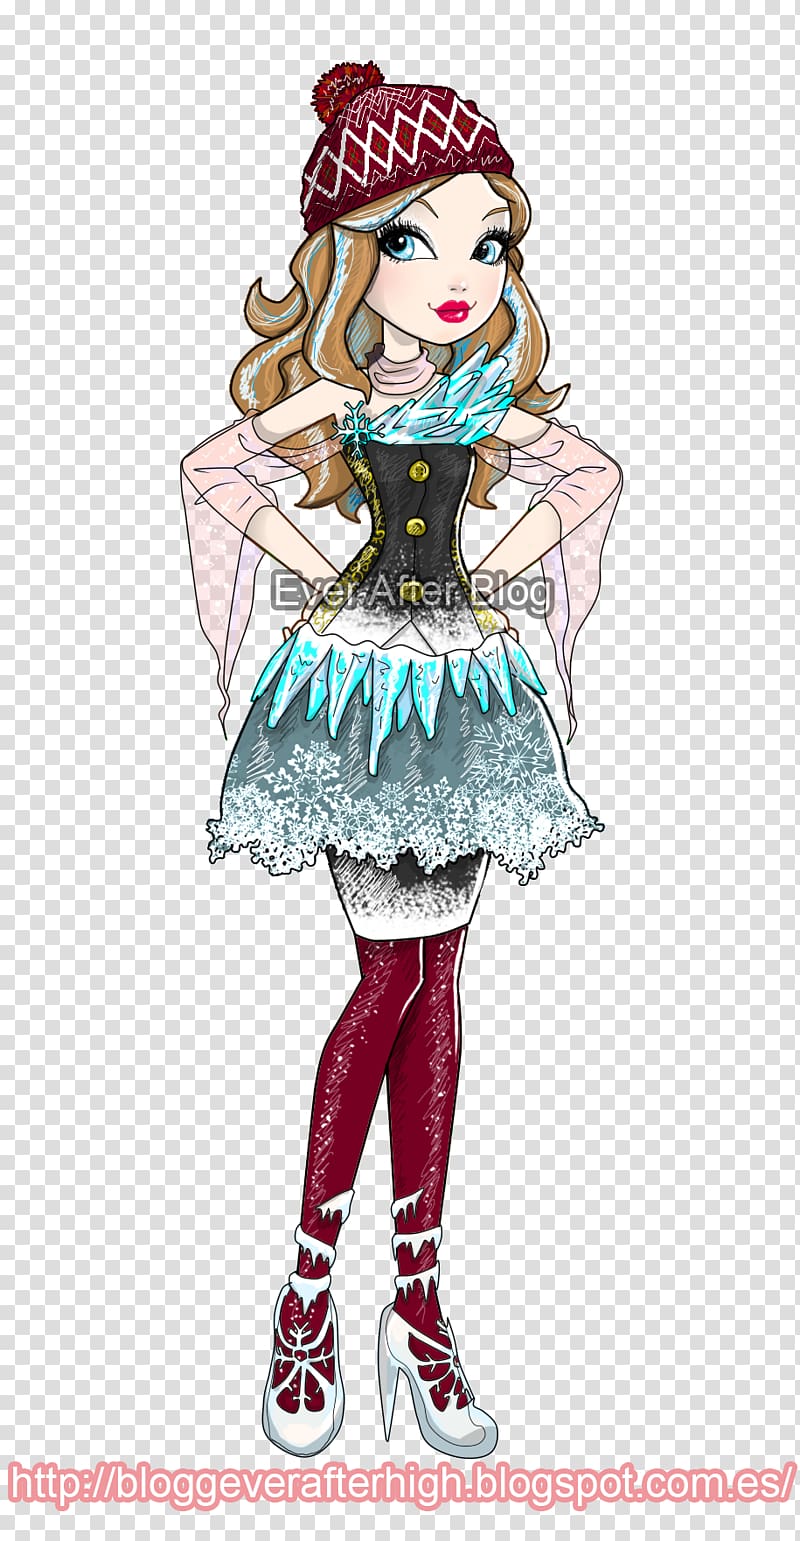 Ever After High The Snow Queen Daughter Doll, doll transparent background PNG clipart